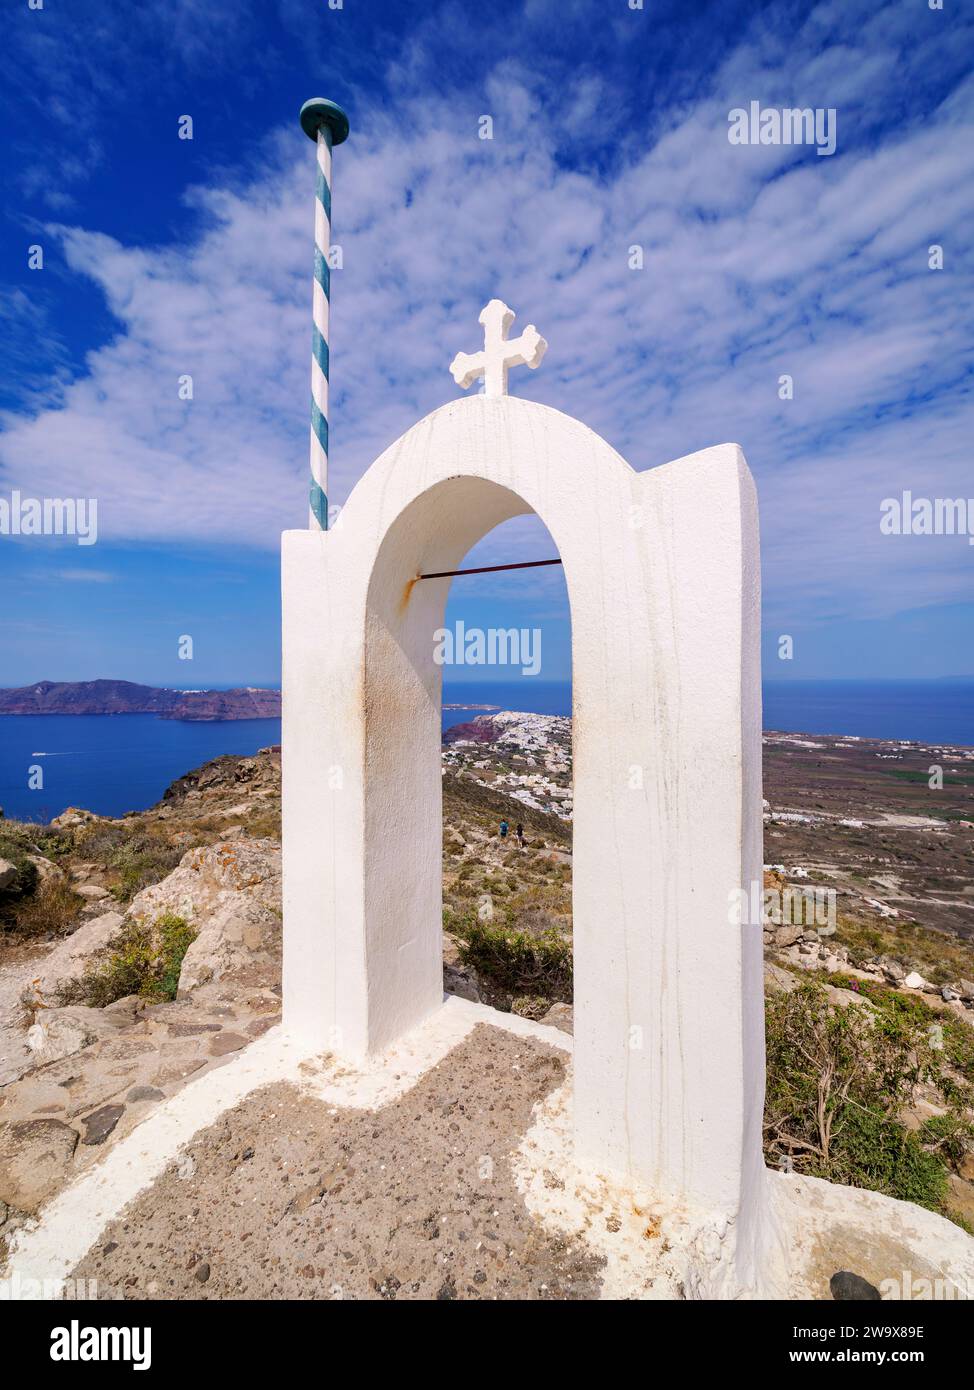 The Assumption of the Virgin Mary Holy Chapel, Santorini or Thira Island, Cyclades, Greece Stock Photo